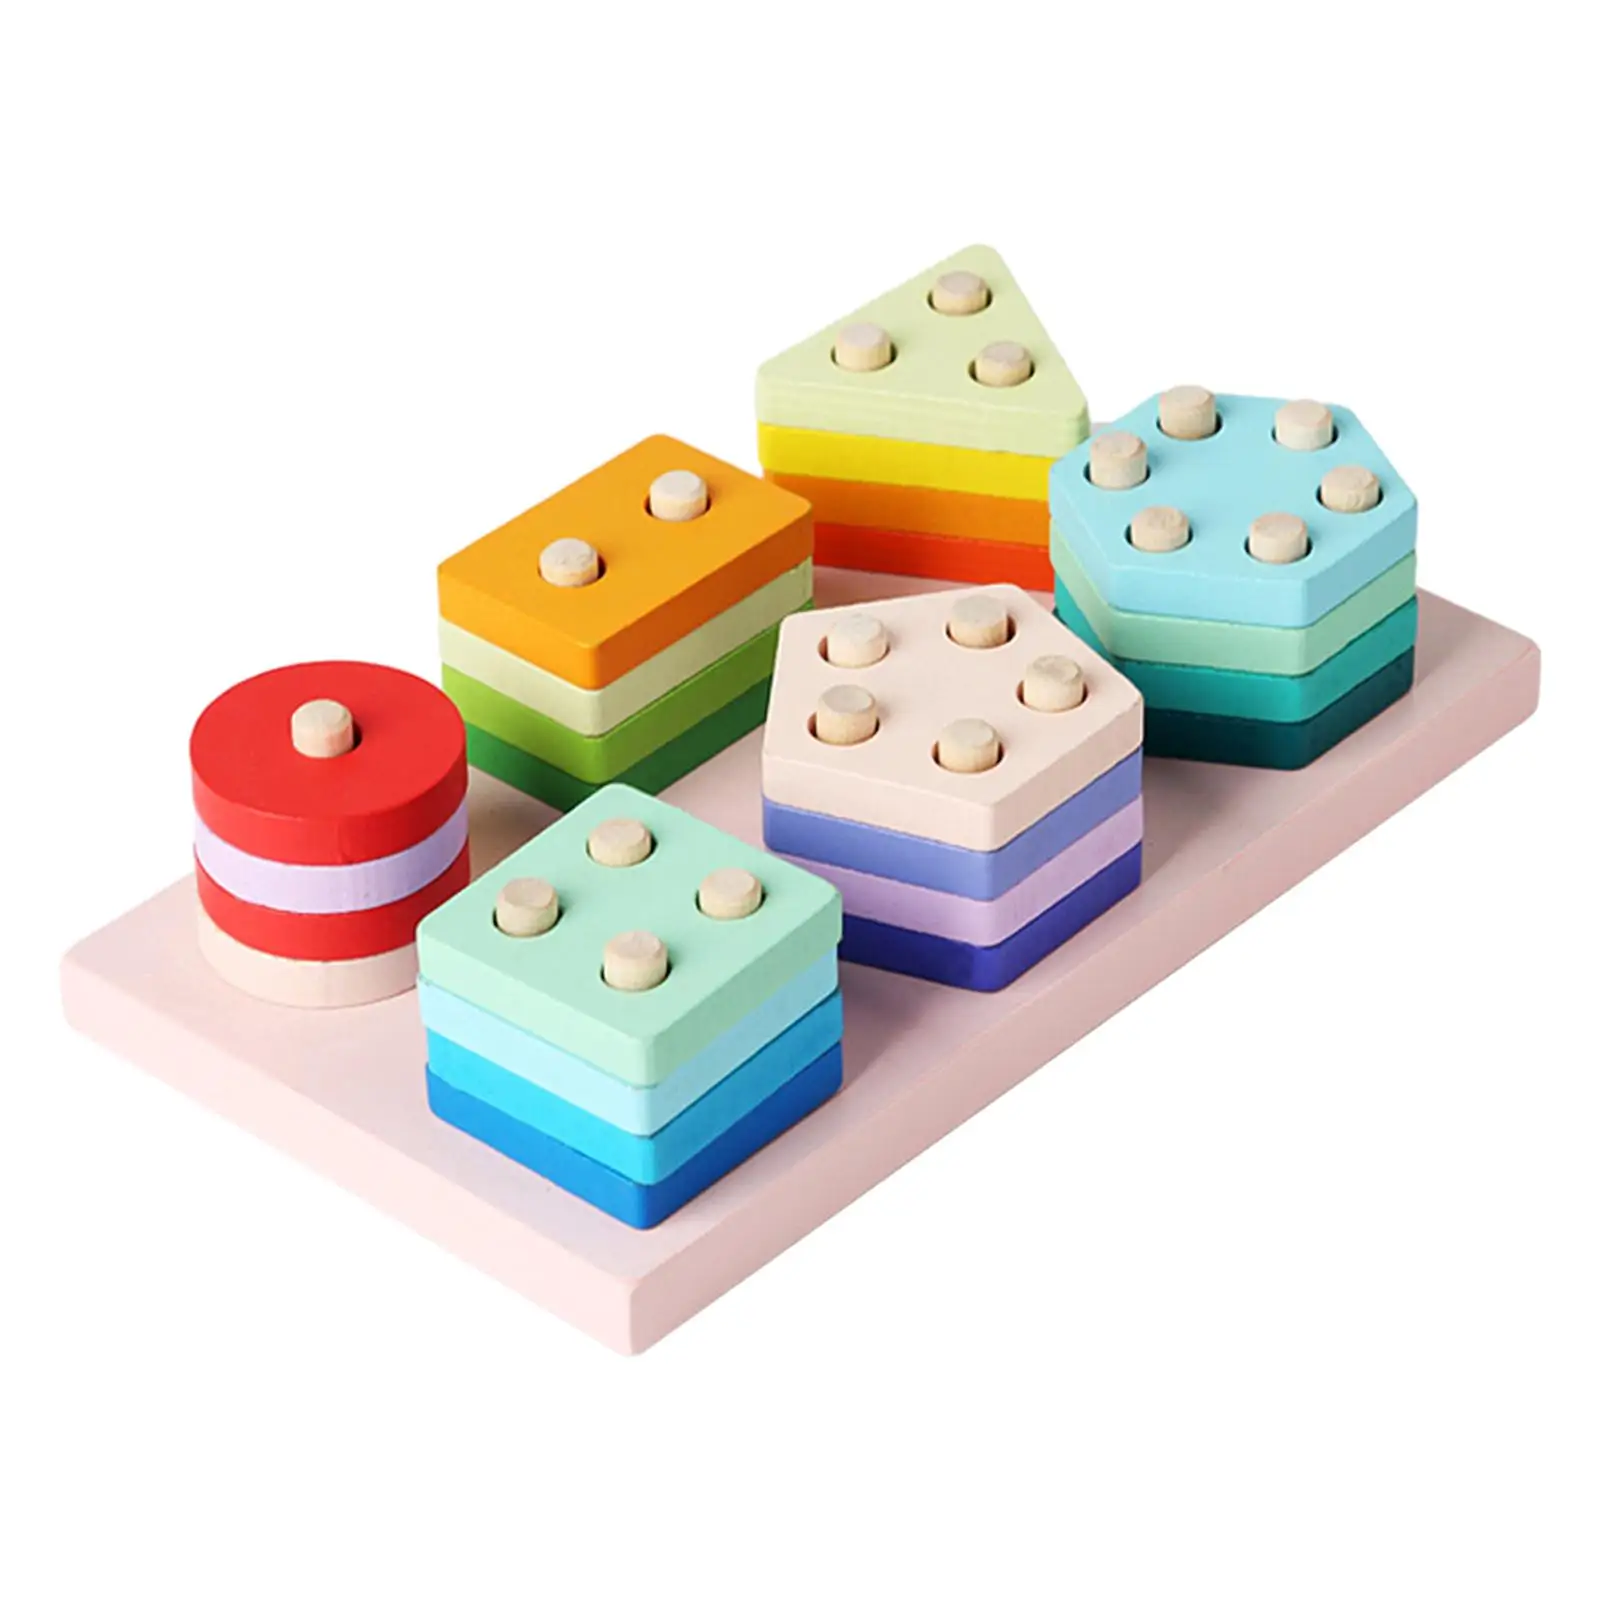 Wooden Sorting Matching Puzzle Bright Color Educational Toy Hand Eye Coordibation Shape Color Recognition for Kids Boys Girls